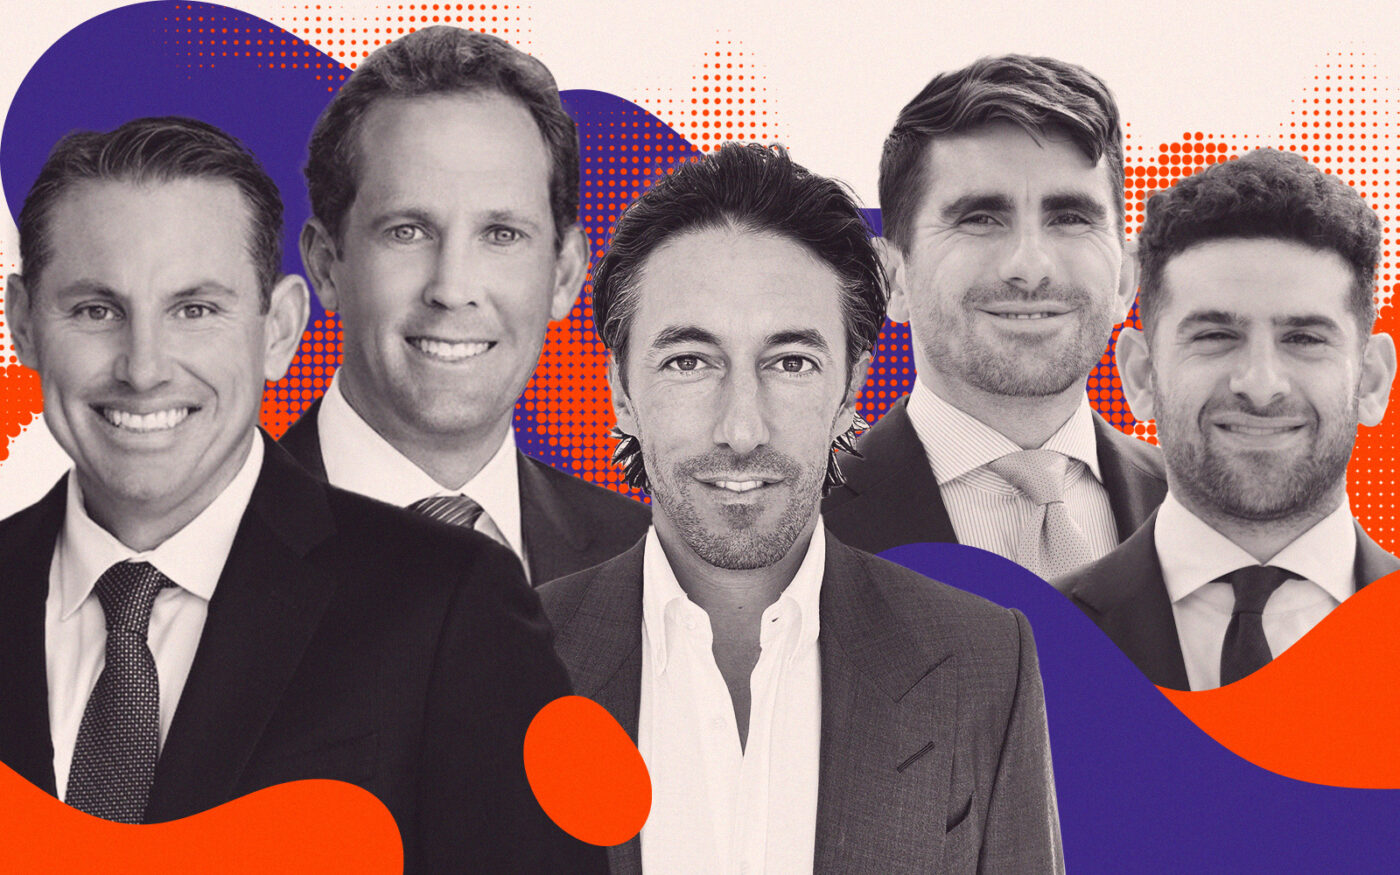 Waterford Property Company’s Sean Rawson and John Drachman, Turnbridge Equities' Andrew Joblon and Investment's Benjamin Poirier and Zachary Leichtman-Levine